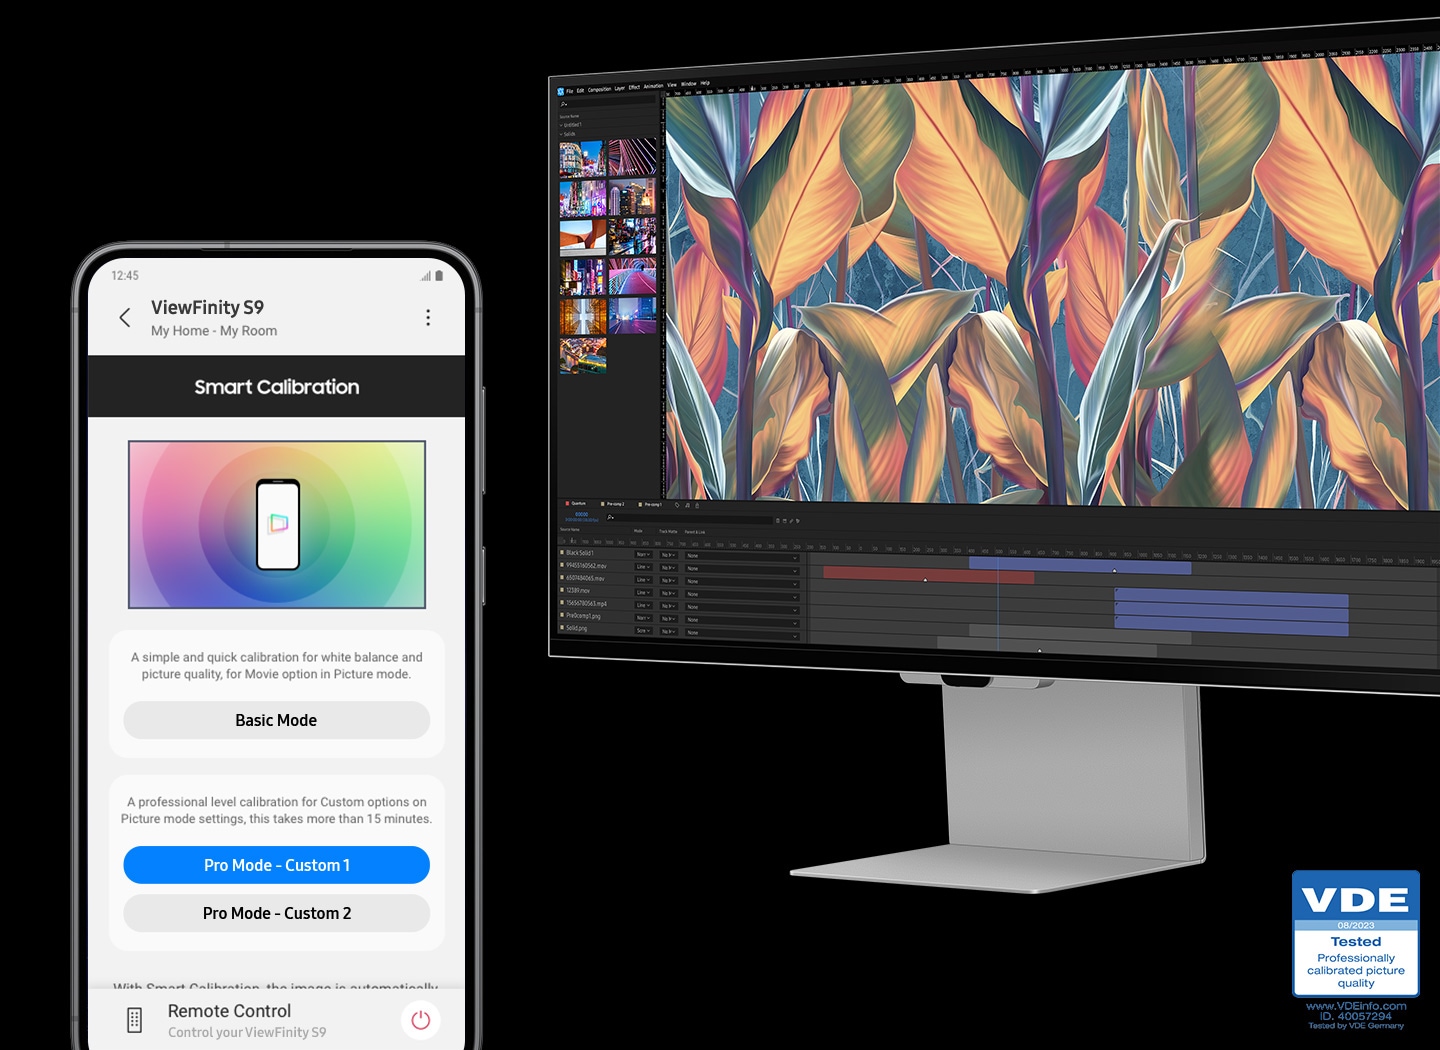 There is a monitor with an abstract image. Next to it, there's a mobile phone, and a pro mode is selected on the phone for smart calibration. Then, the monitor is being calibrated. After the calibration, the image on the monitor gets more vivid and colorful.